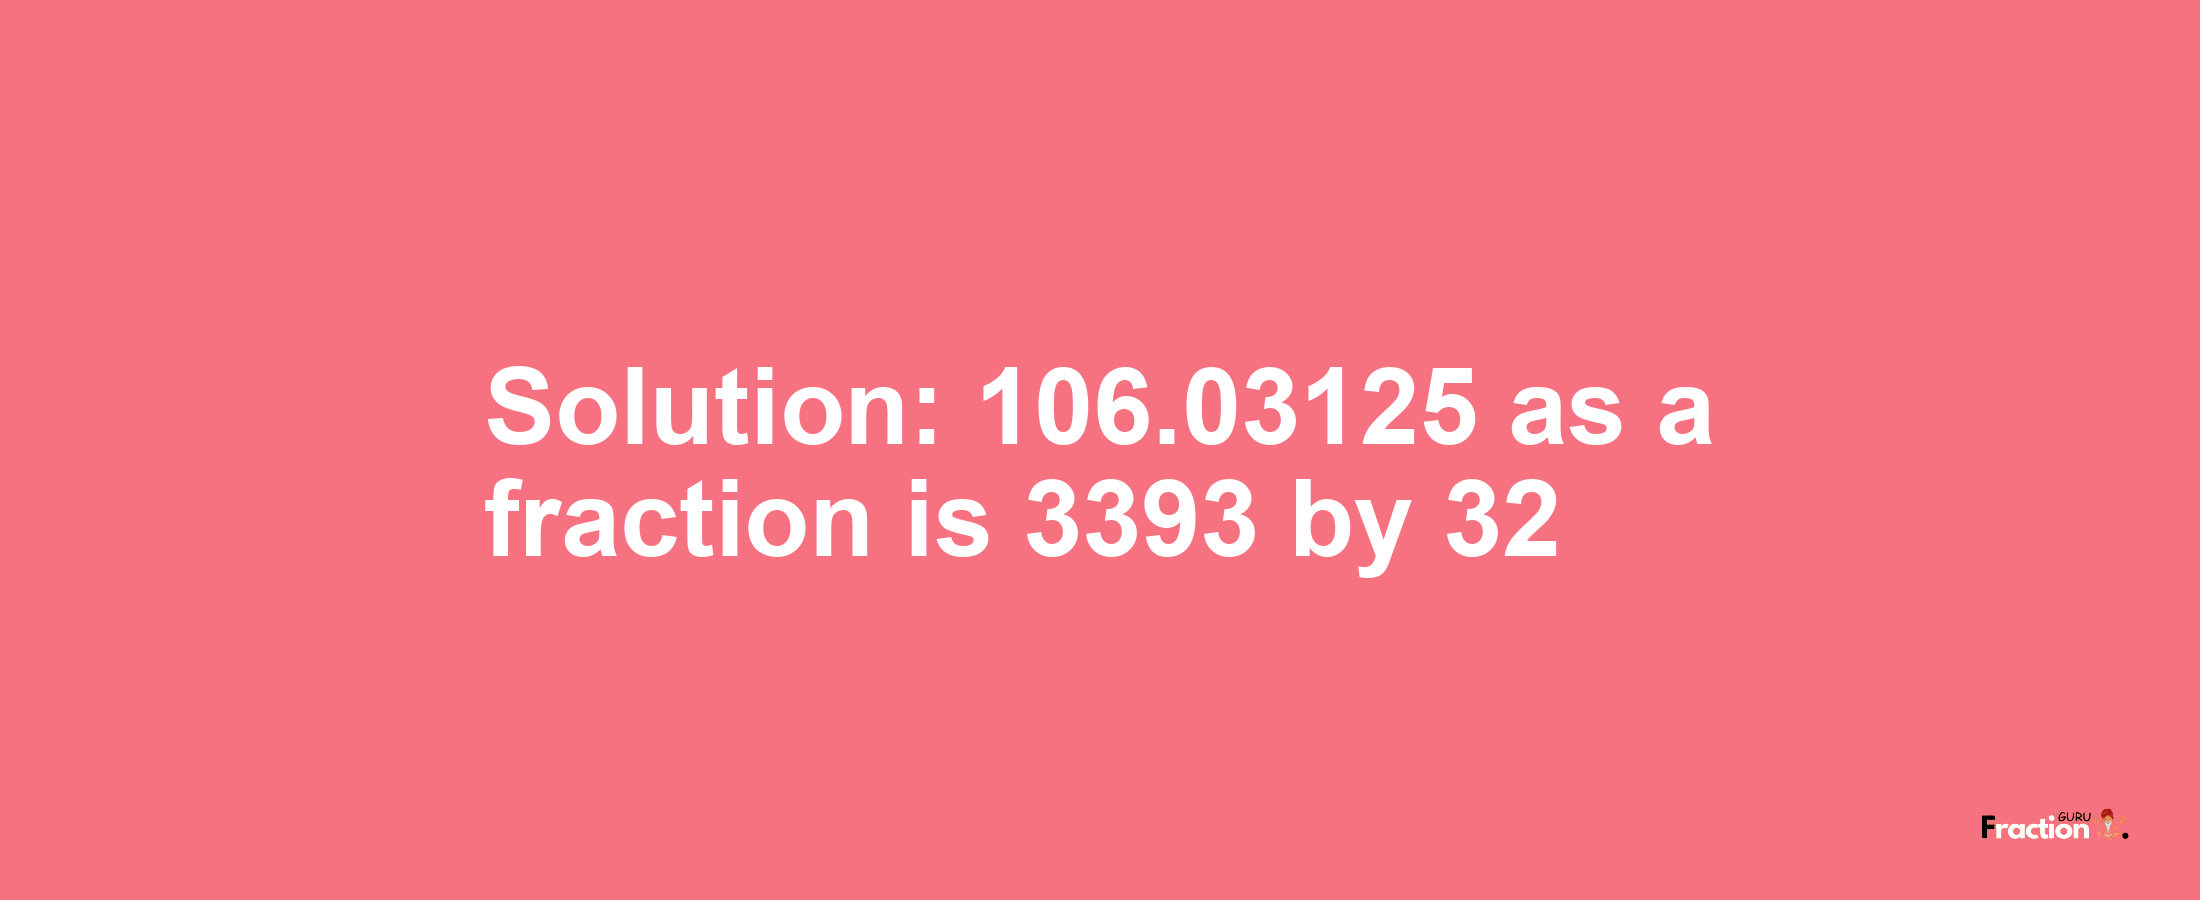 Solution:106.03125 as a fraction is 3393/32